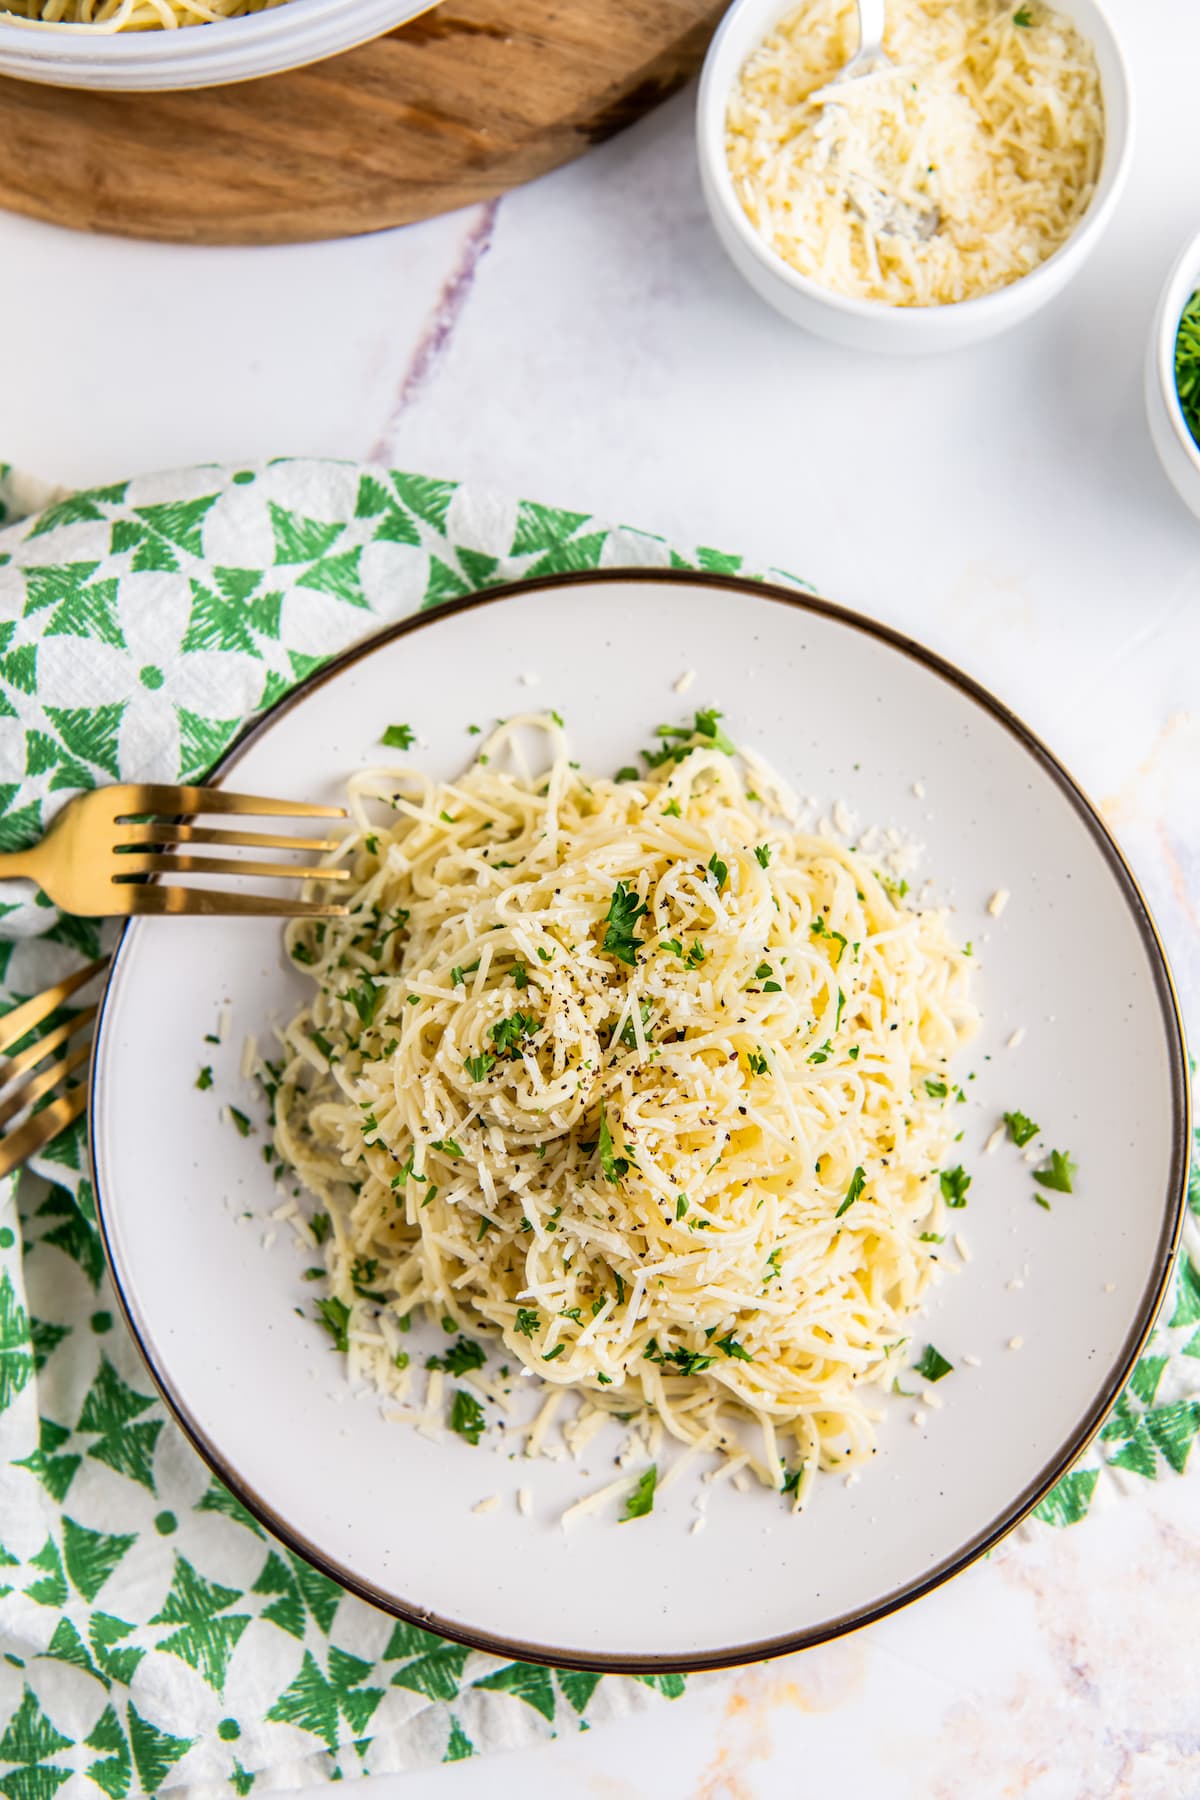 Parmesan butter noodles are seen on a plate with a fork.